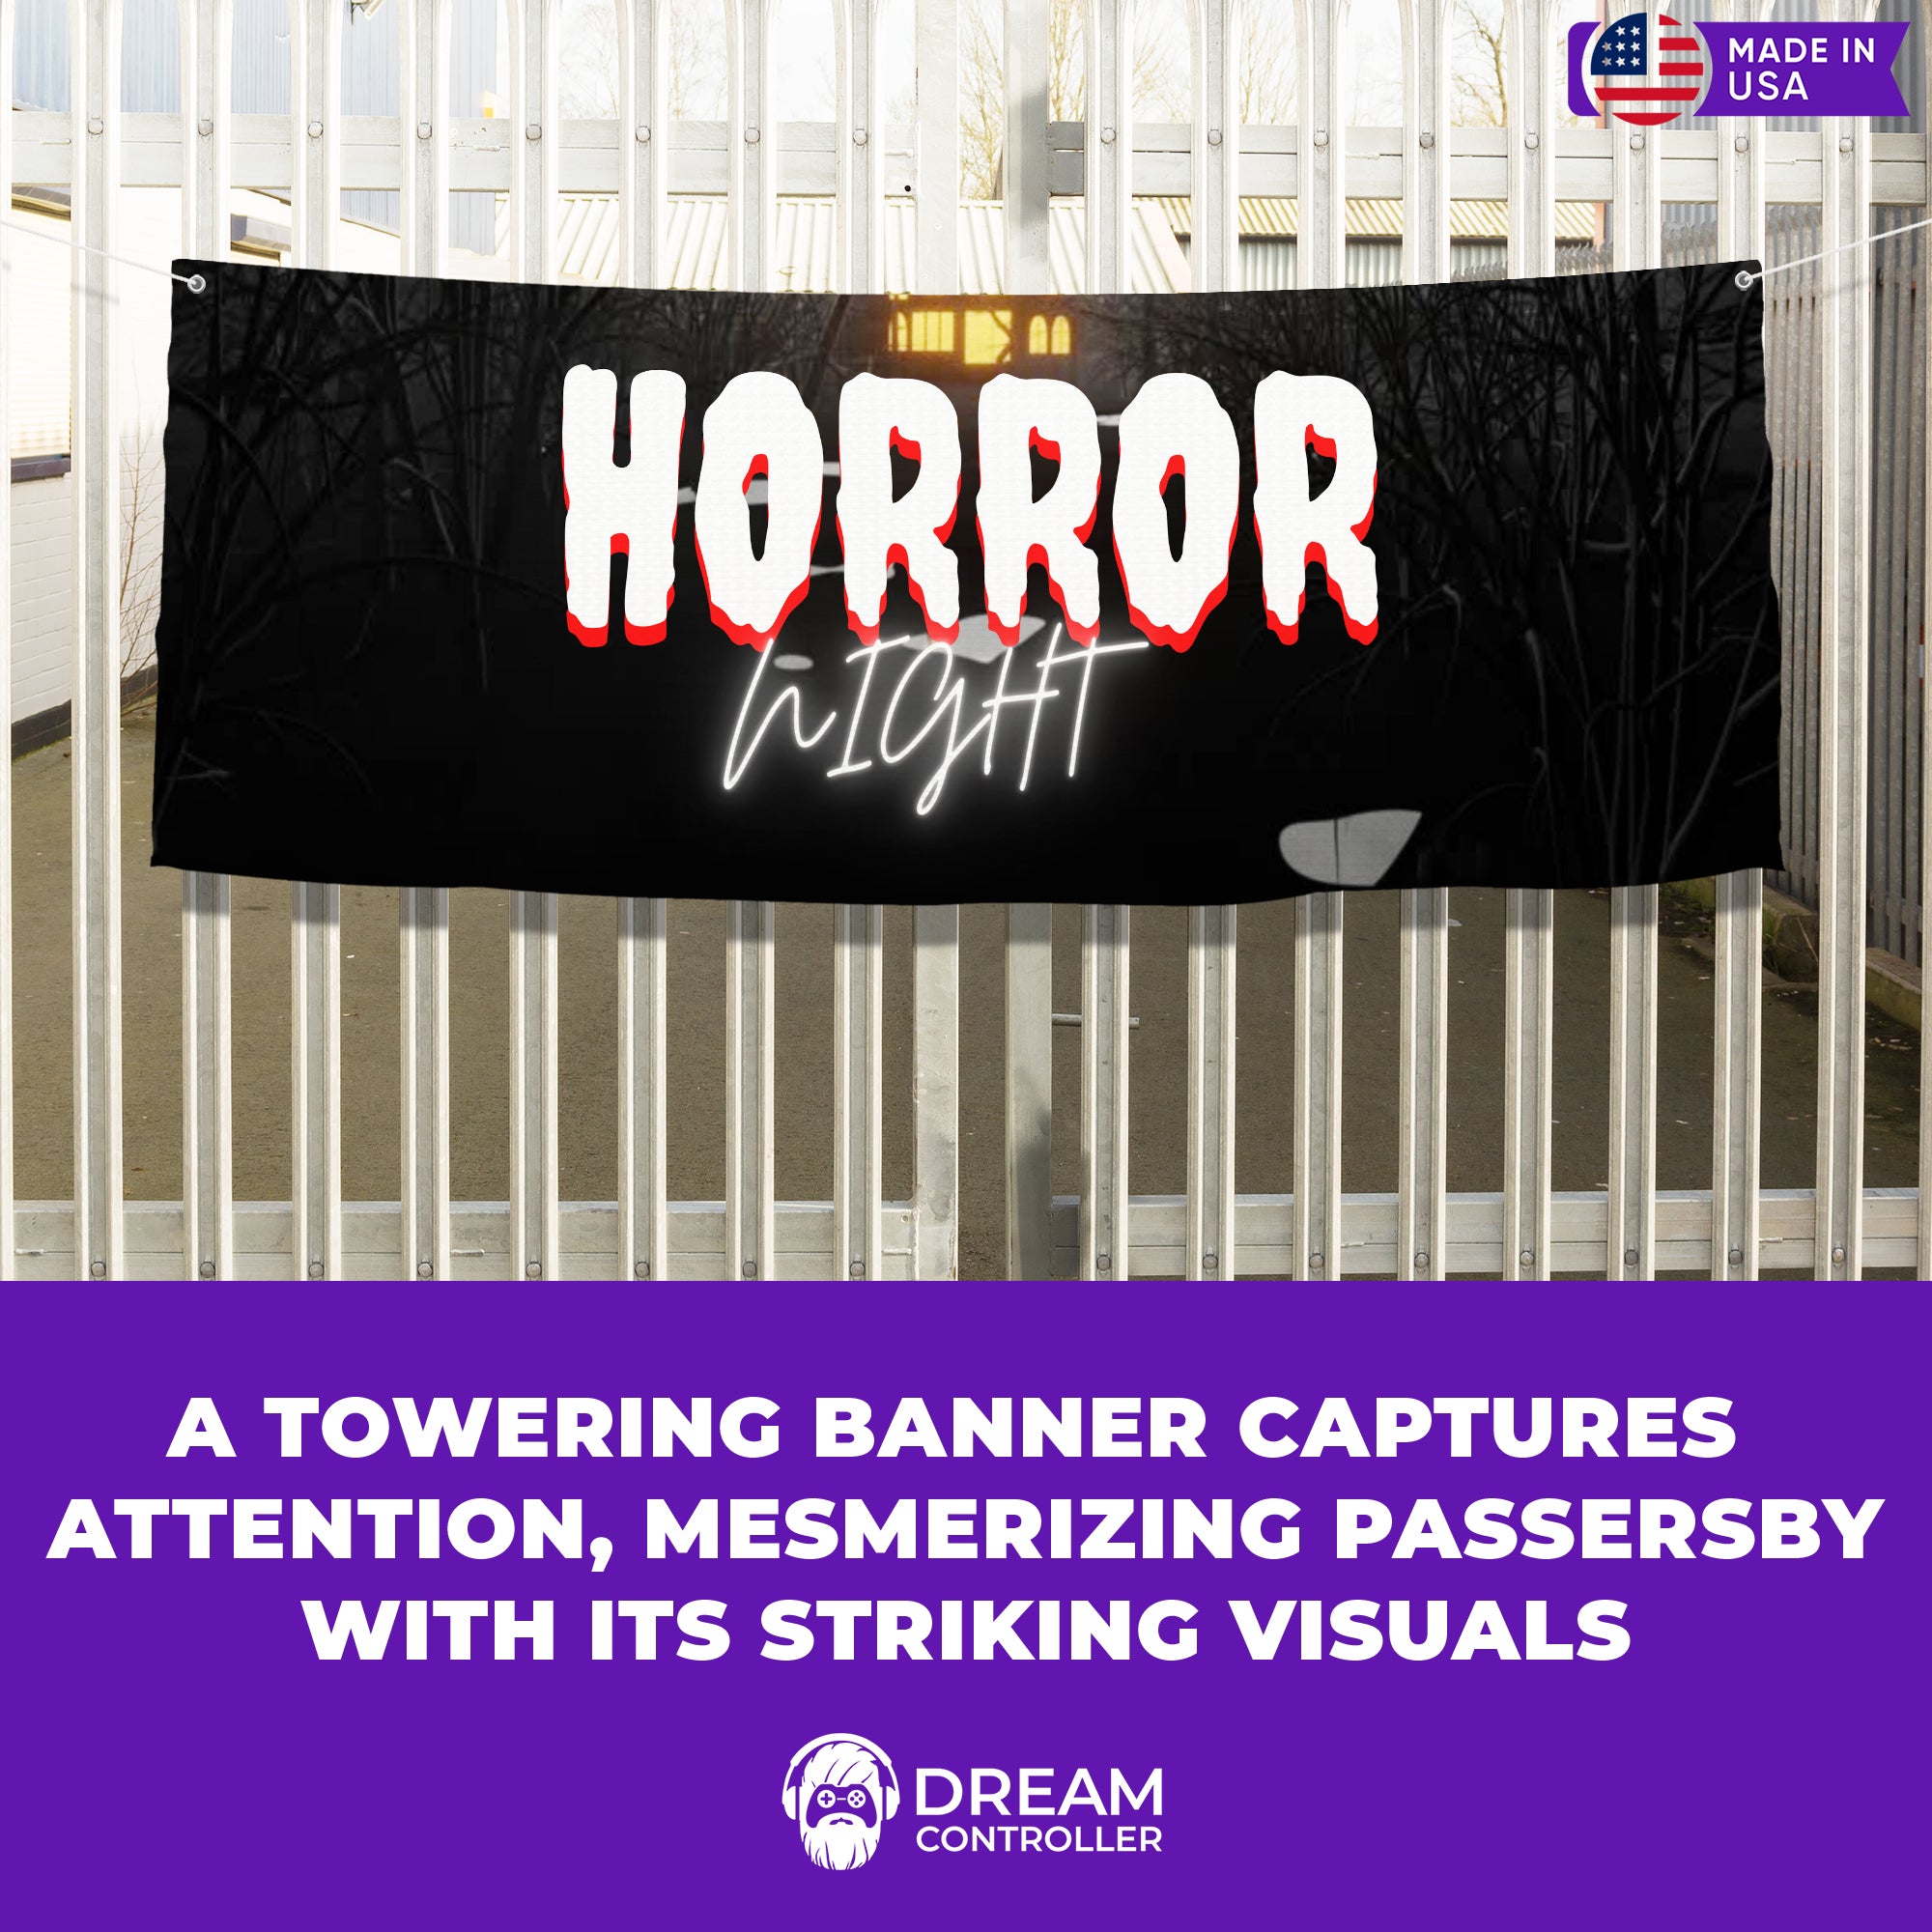 Horror Night Black Halloween Banner - Superior quality, Fade-resistant fabric